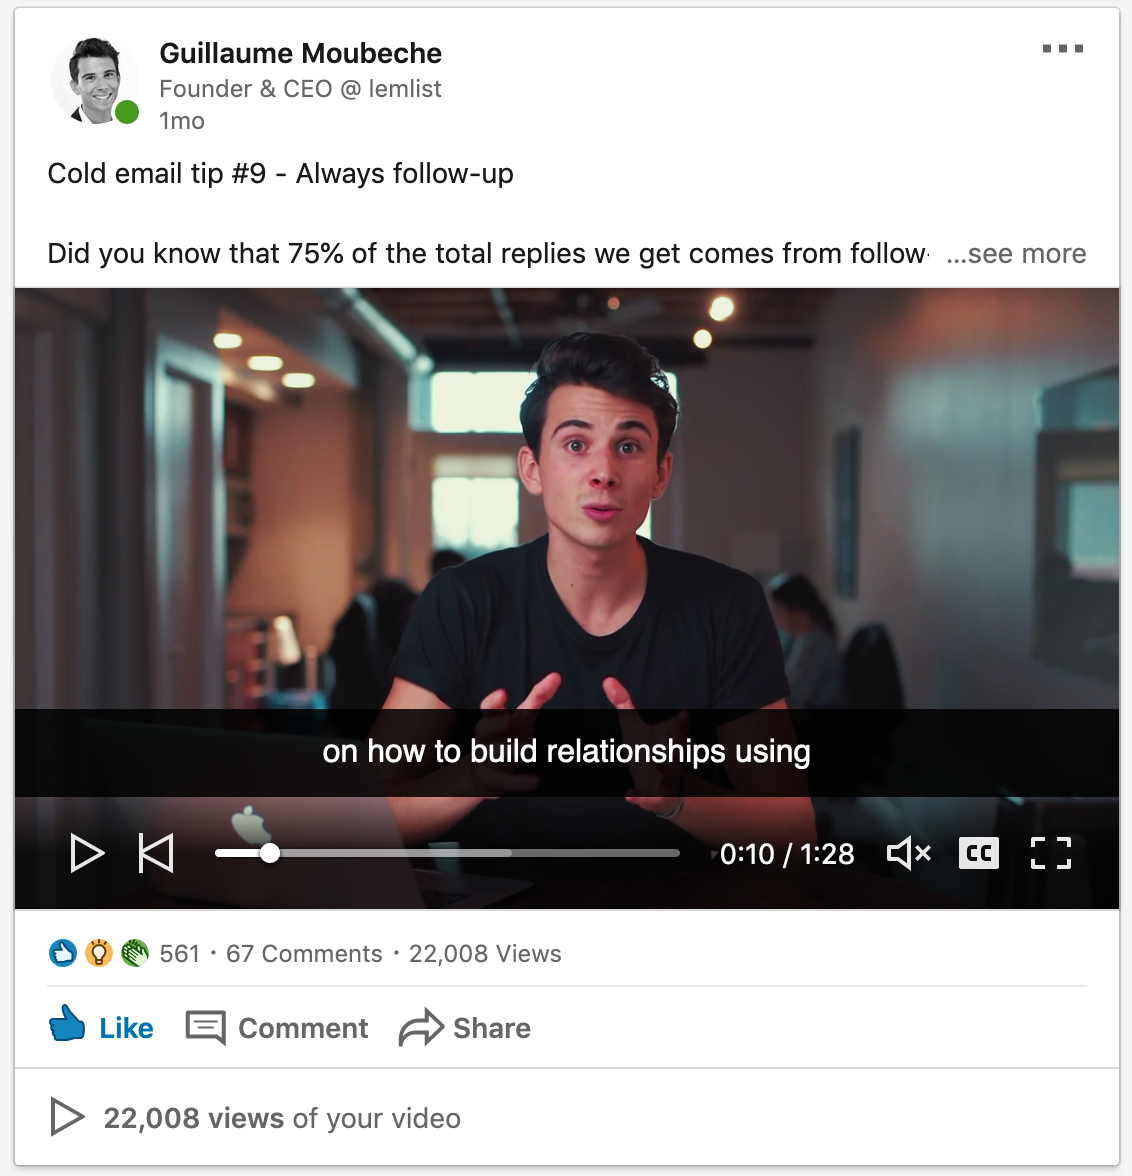 Example of Guillaume repurposing content on LinkedIn